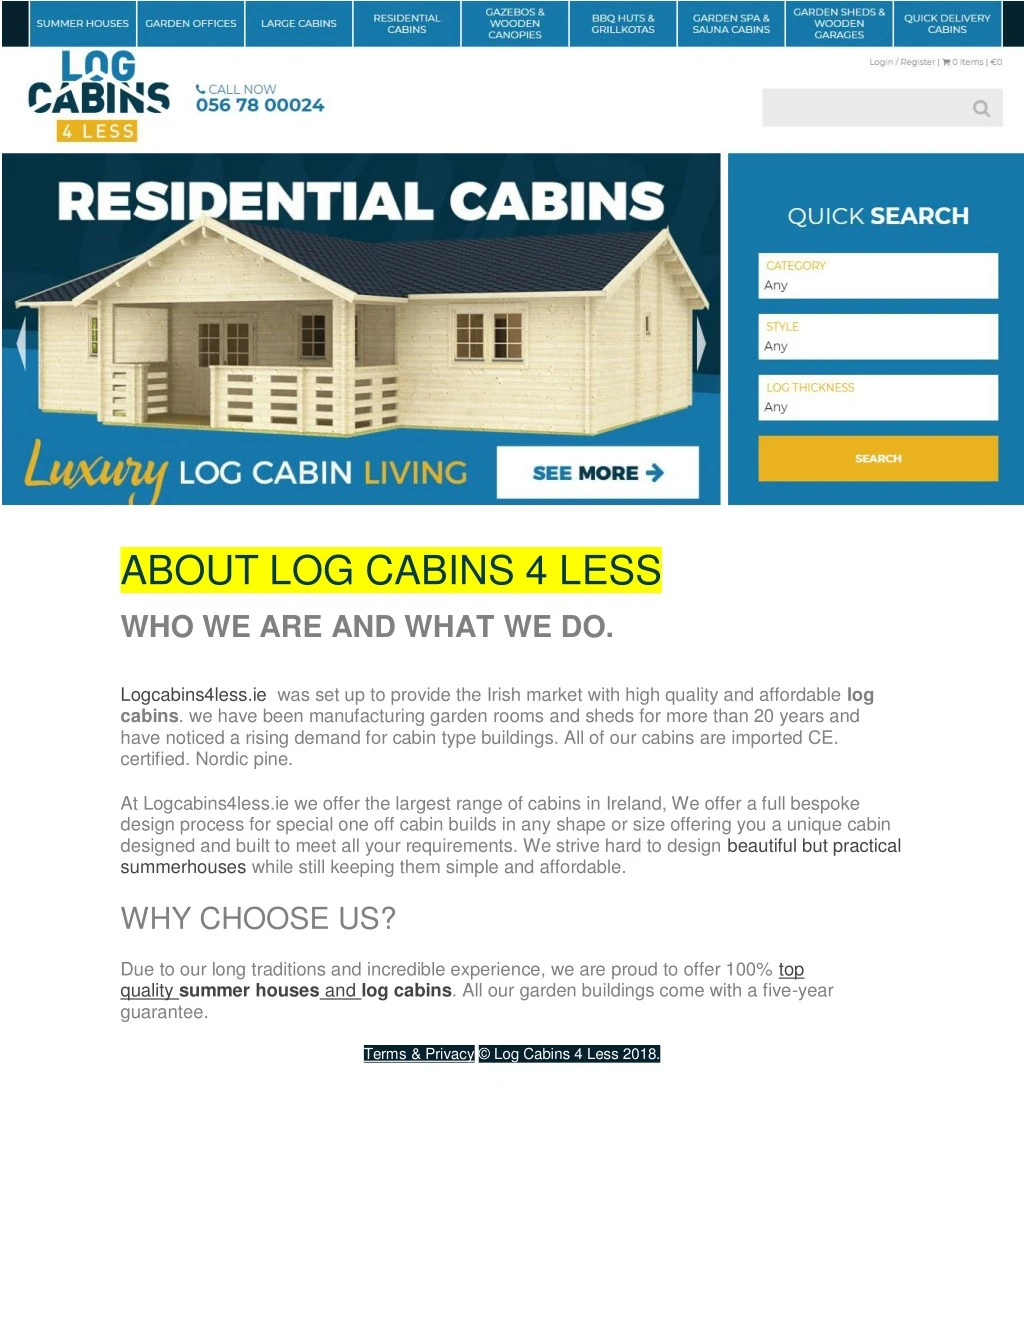 about log cabins 4 less